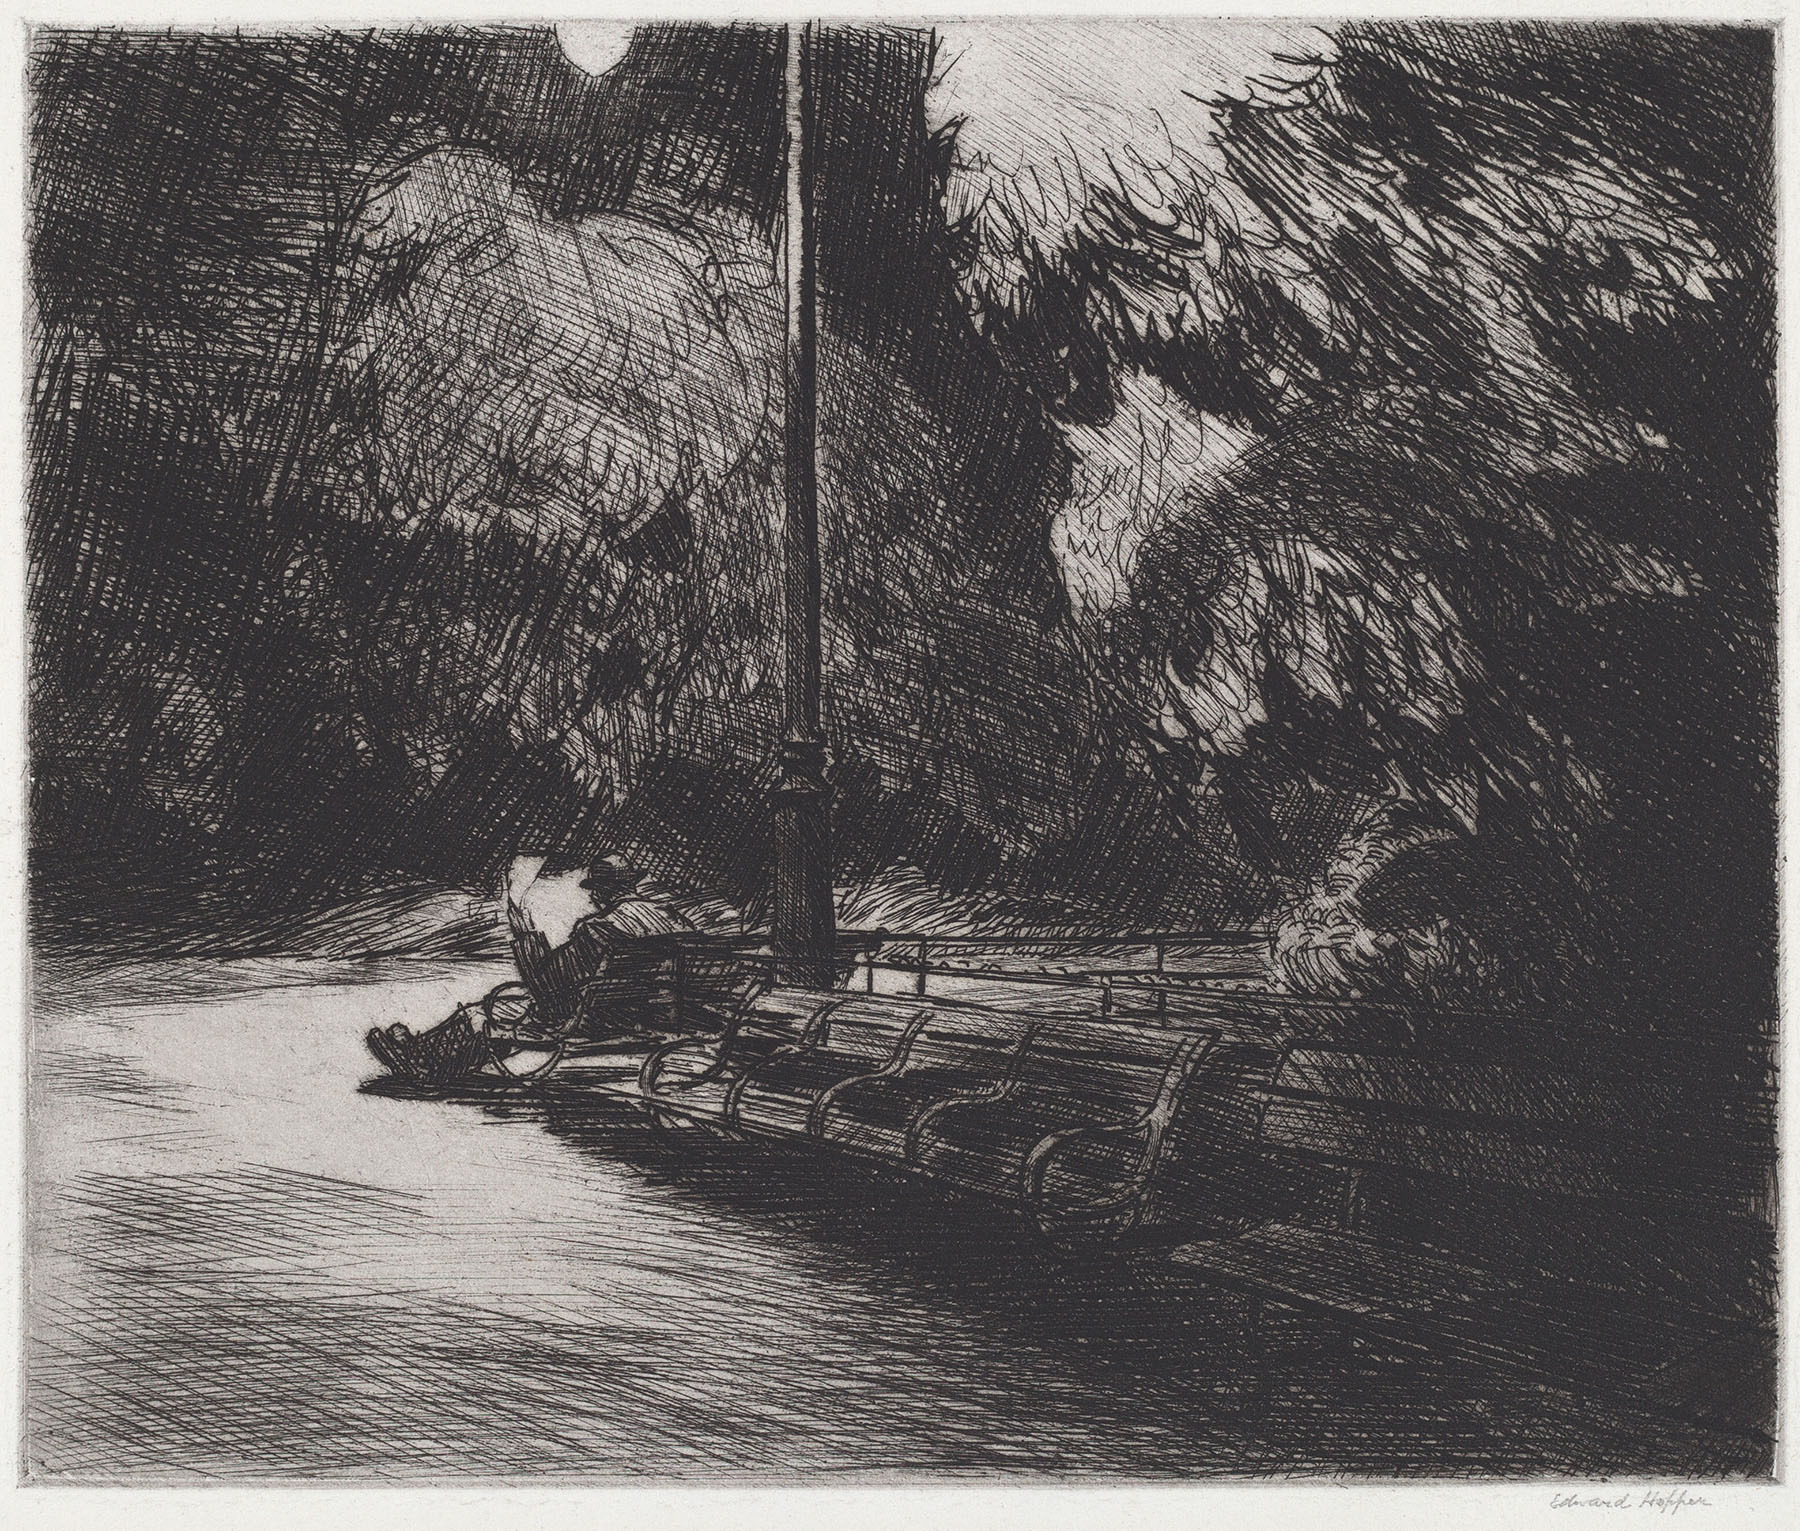 Edward_Hopper,_Night_in_the_Park,_ Rosenwald Collection 53